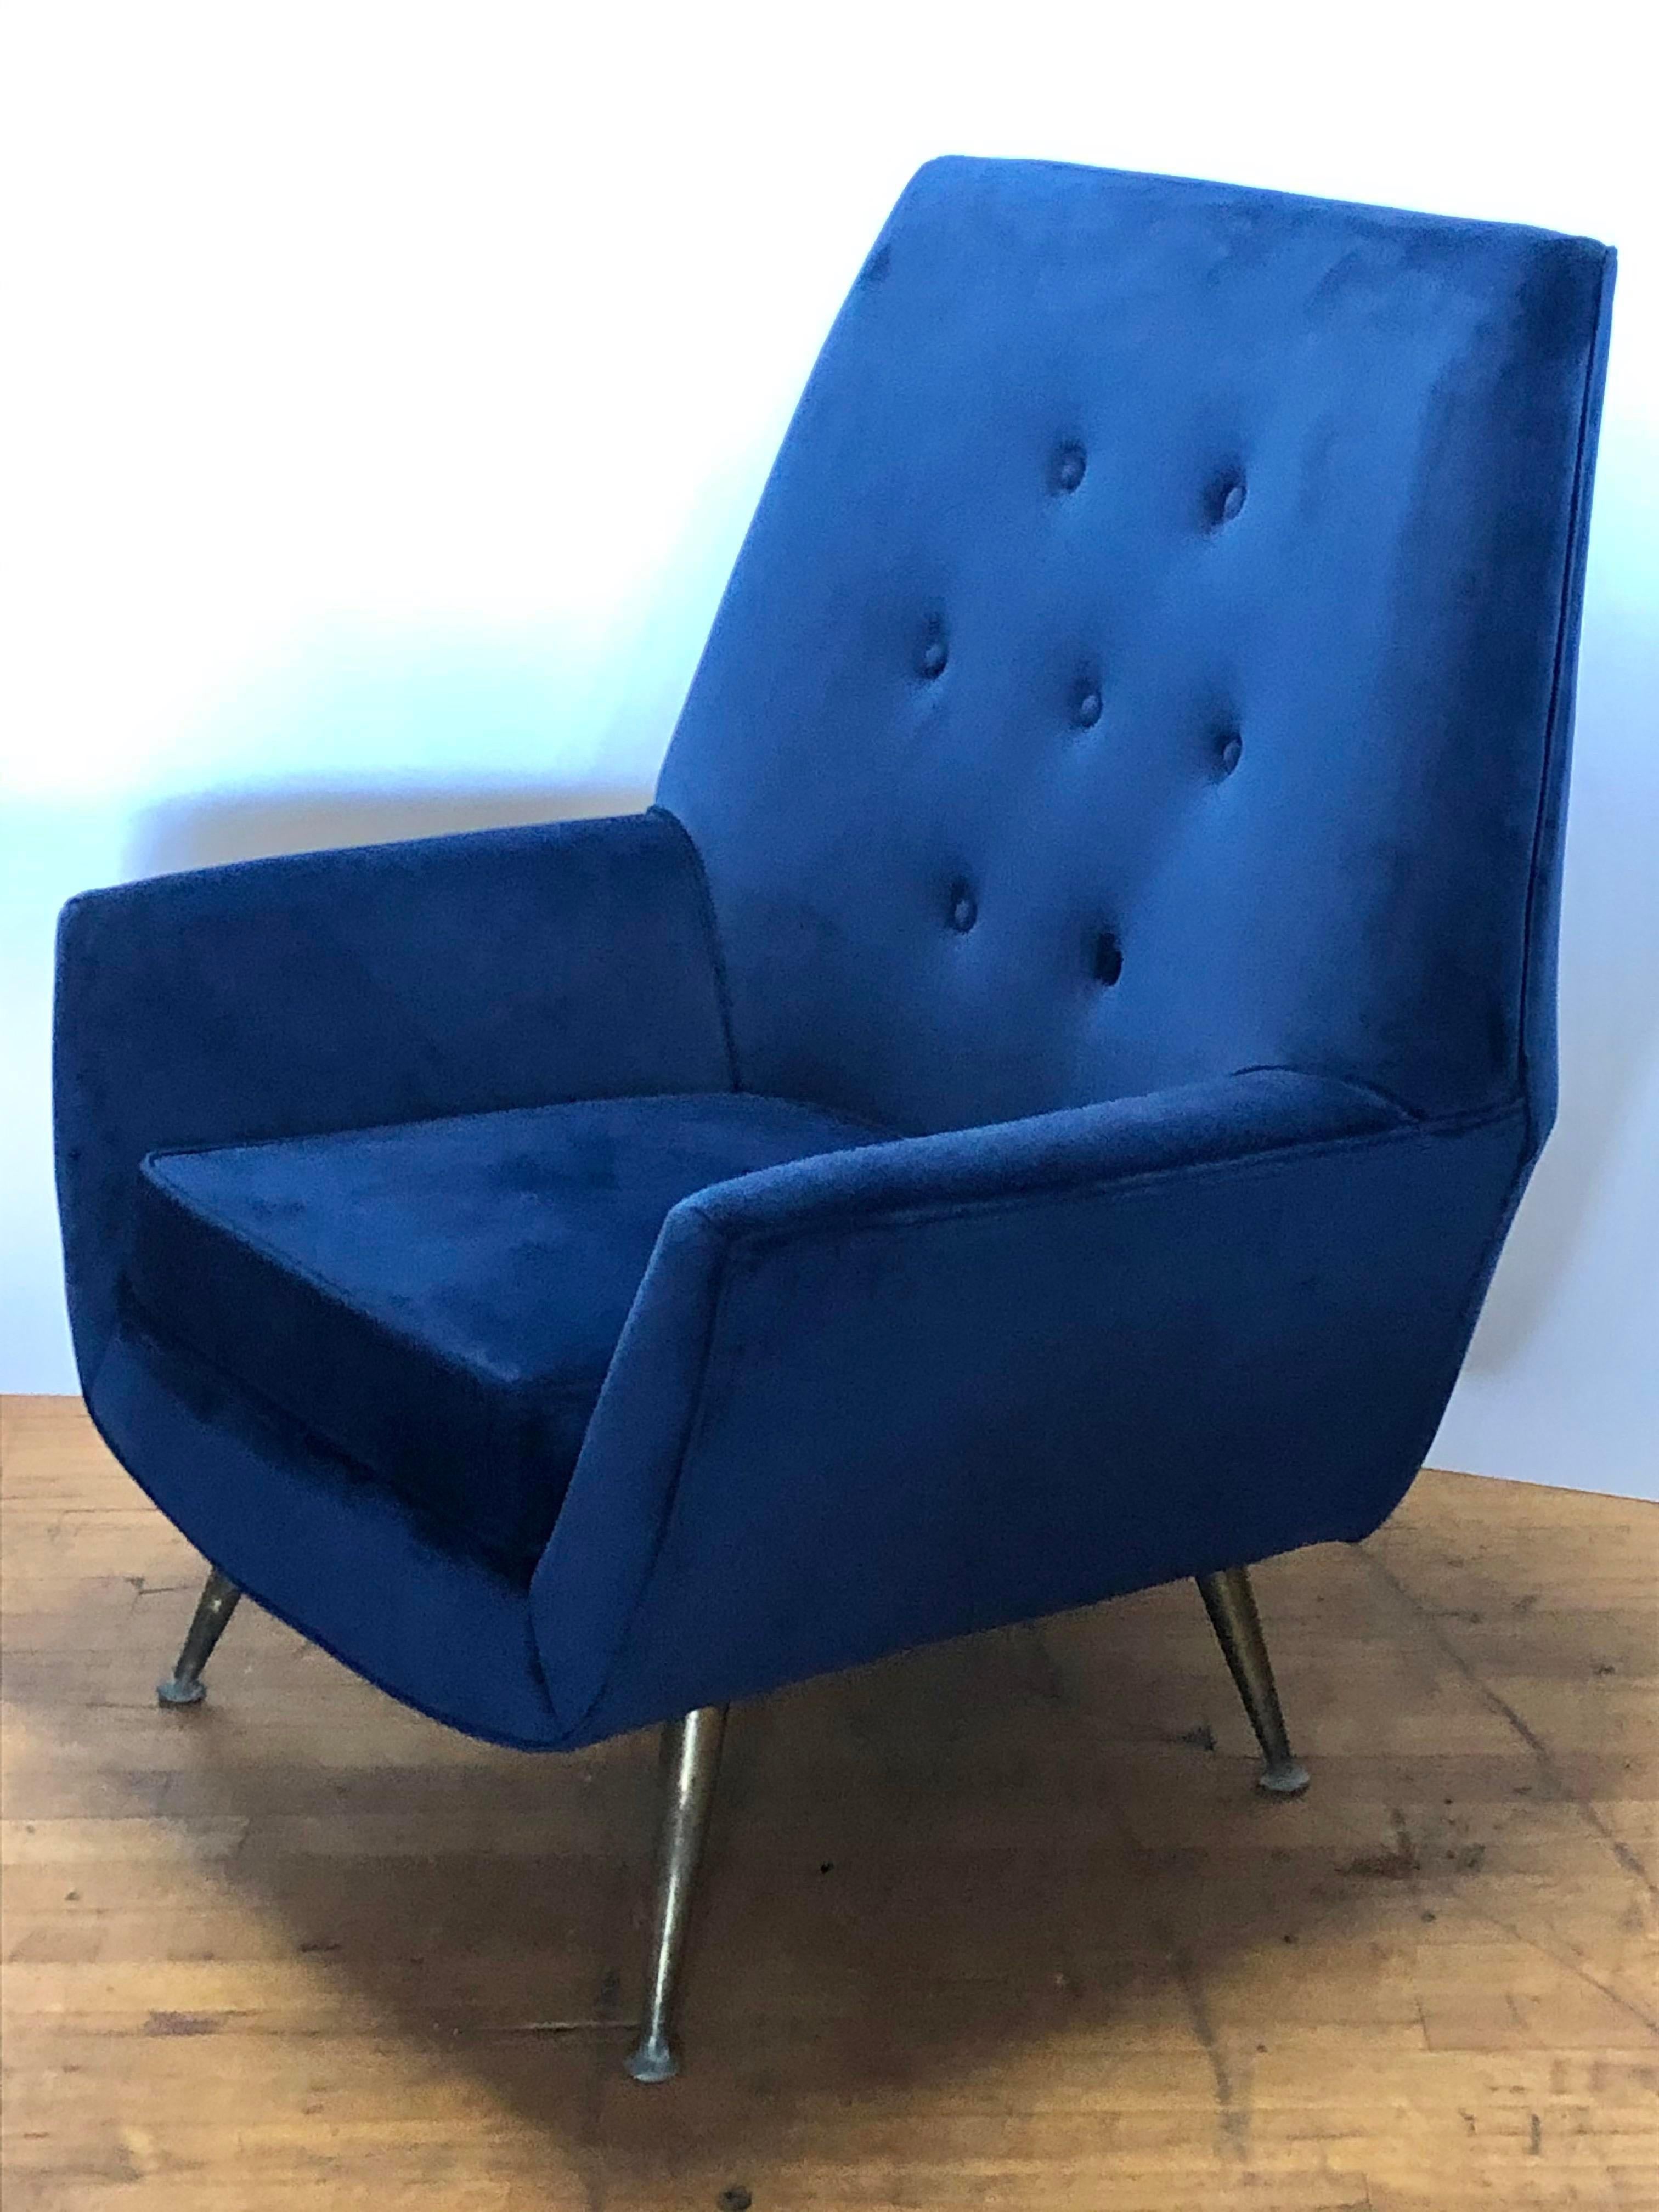 Midcentury Italian lounge chair with brass legs and new velvet upholstery.